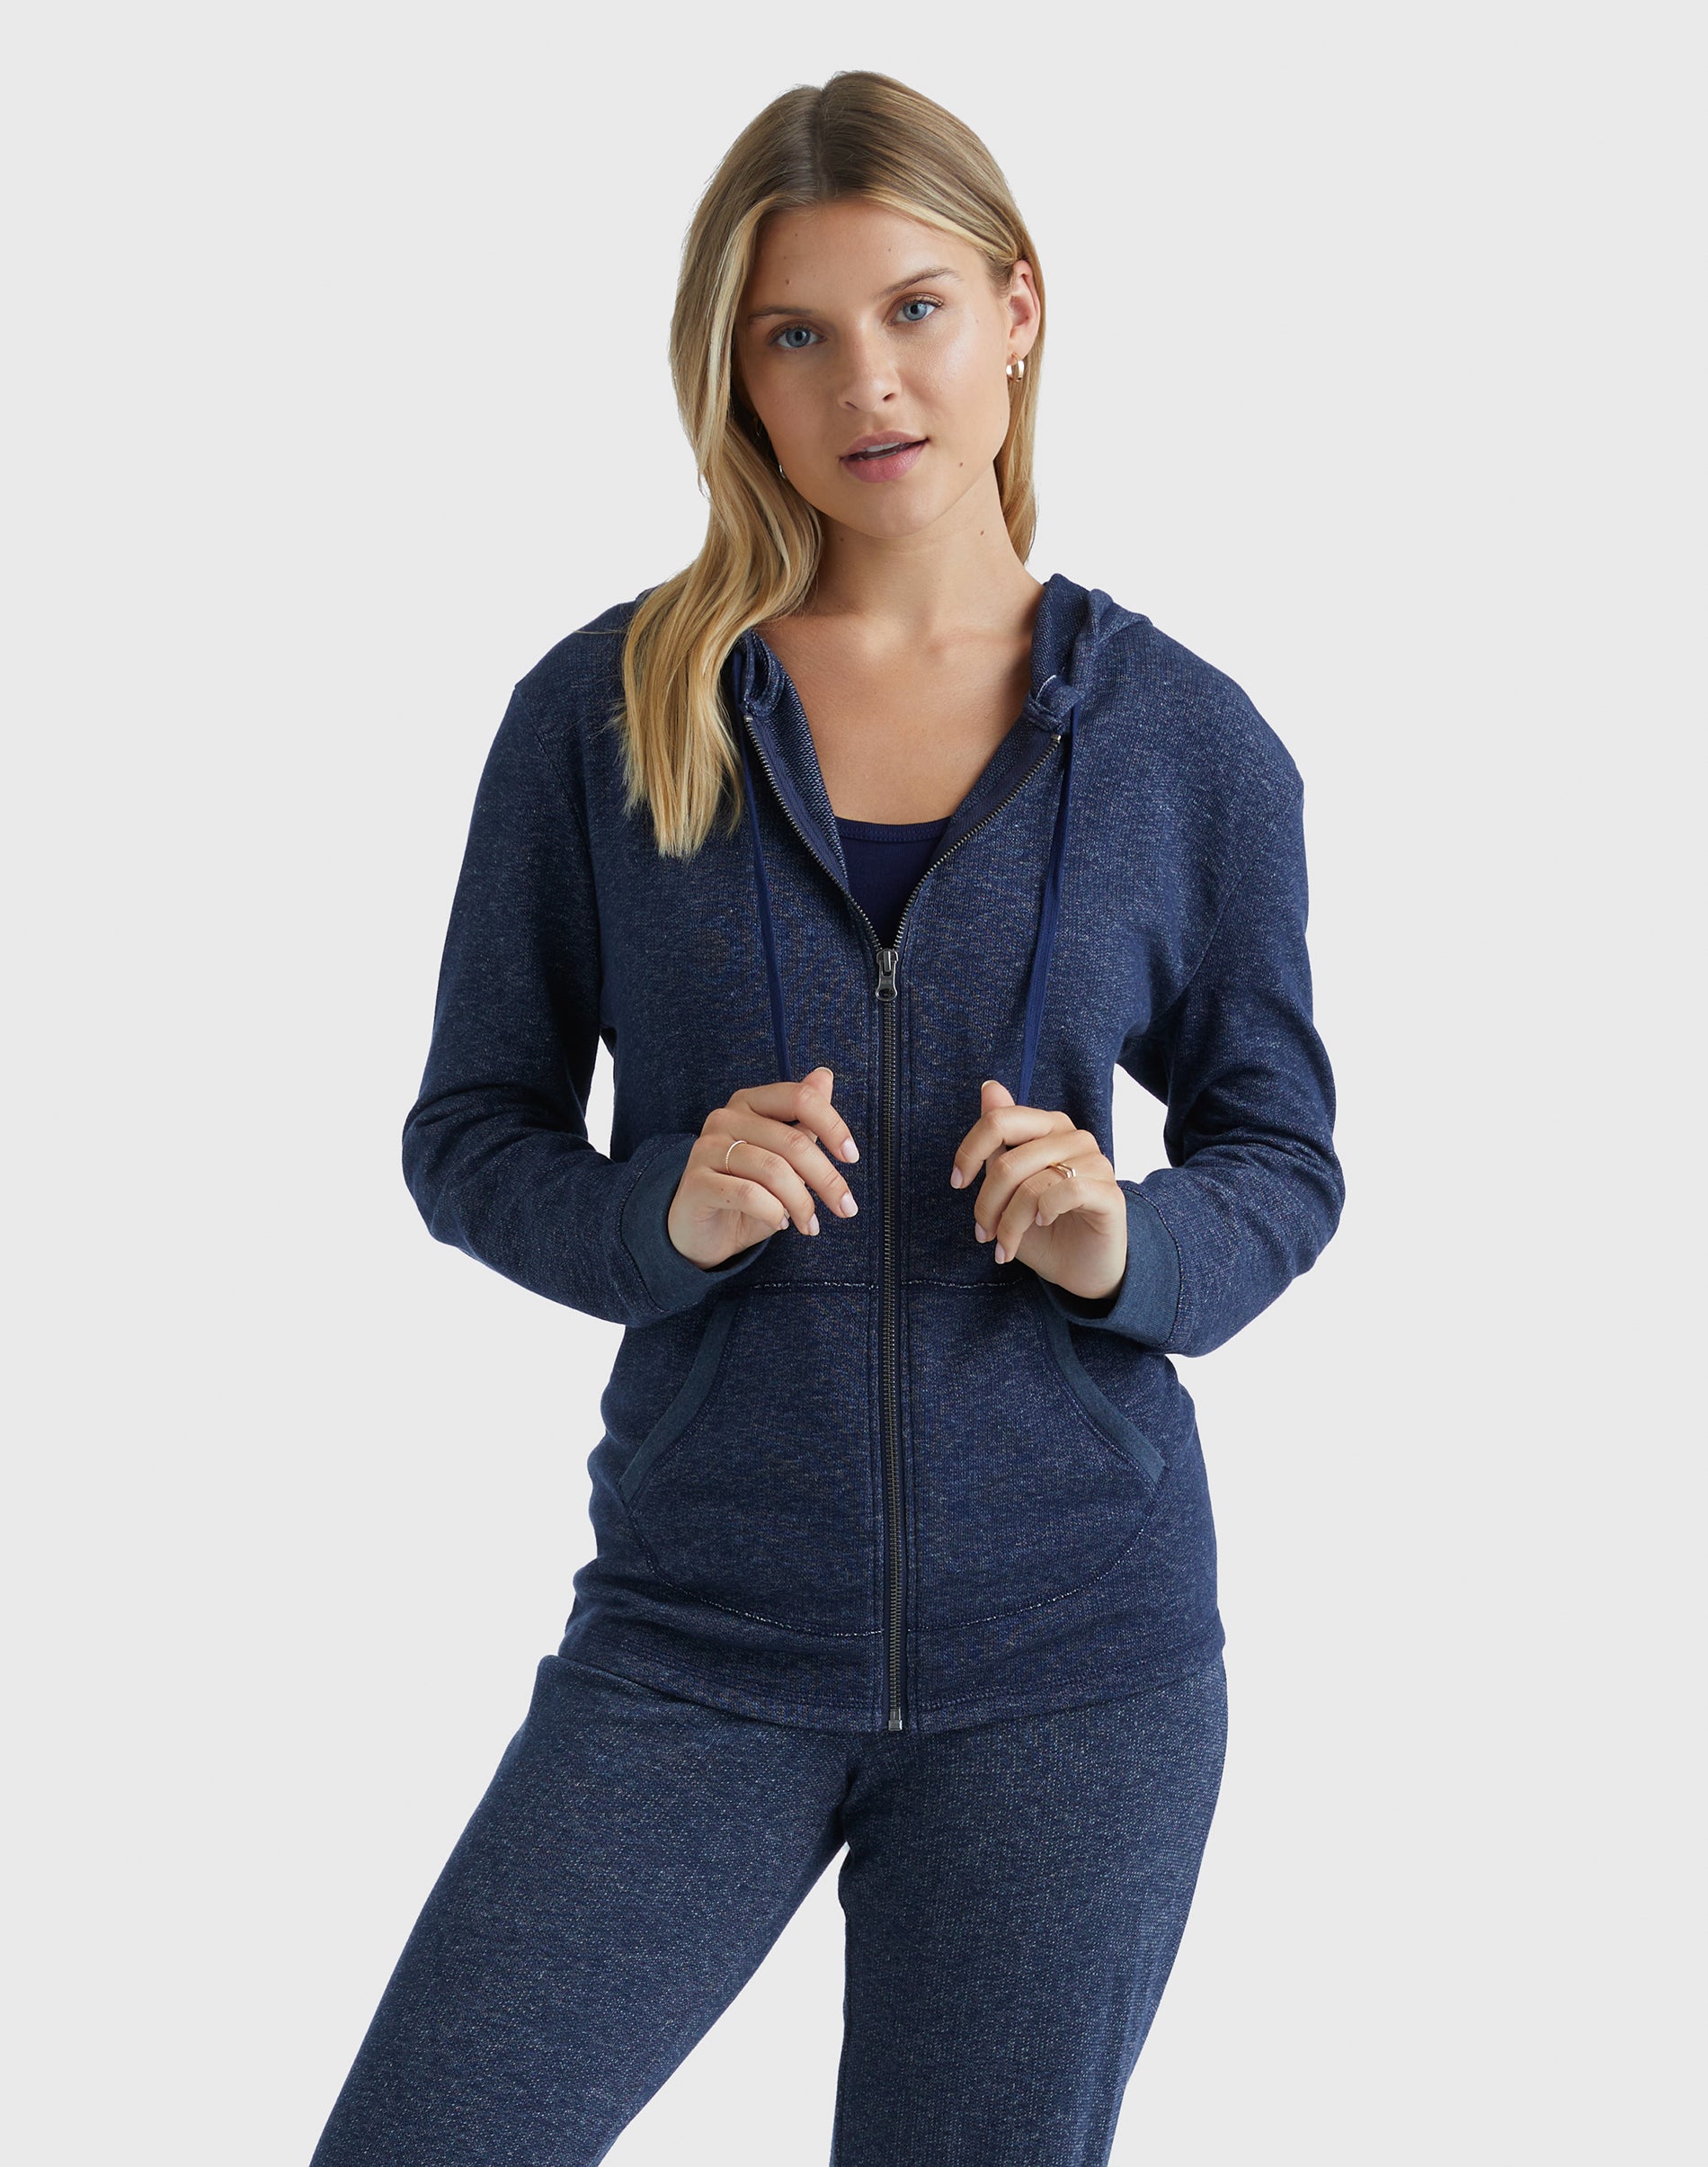 Women’s lightweight hoodie – good quality in all materials